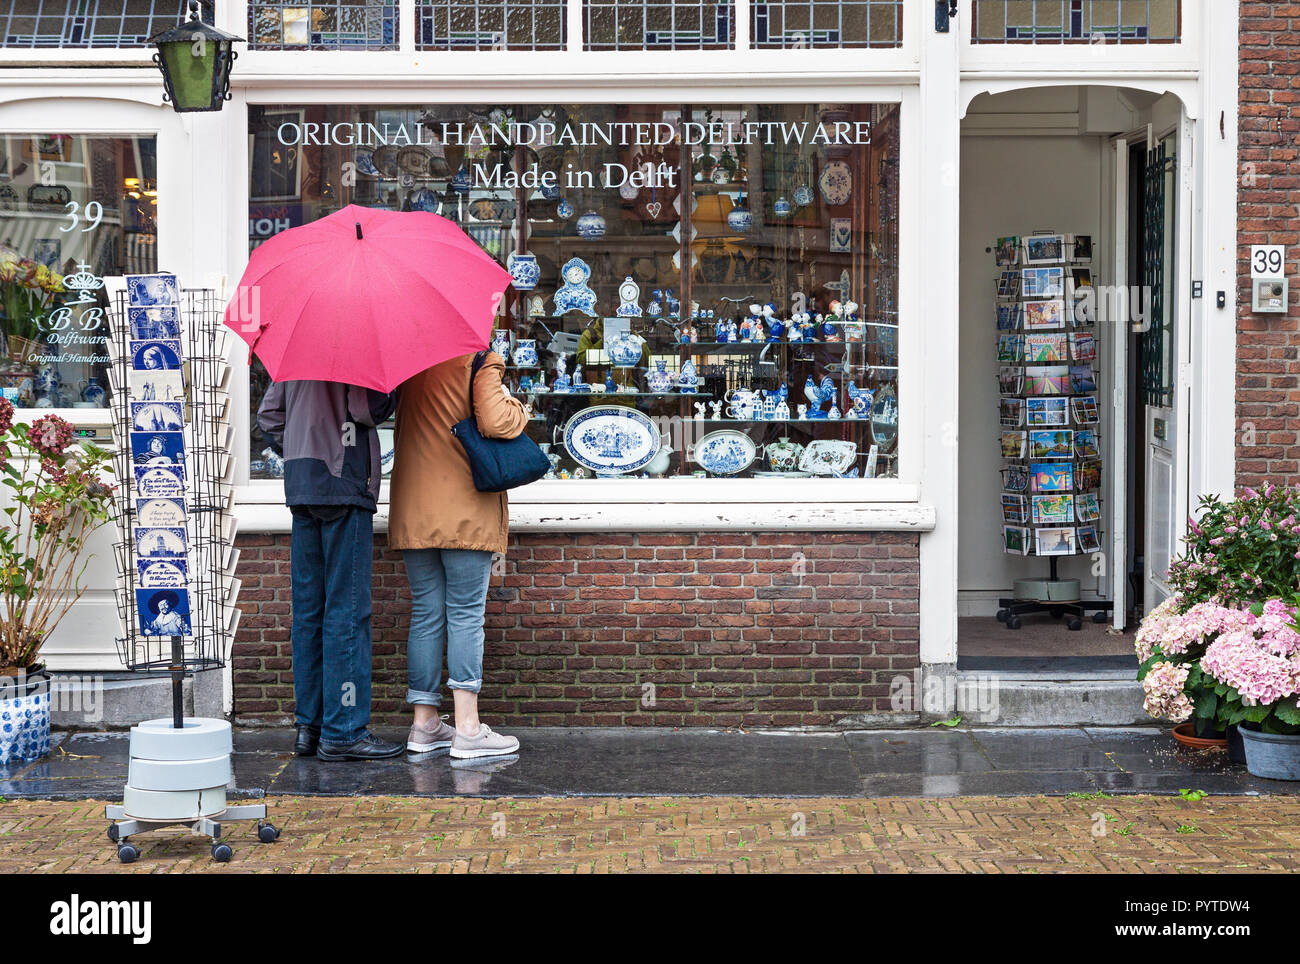 Two tourists with red umbrella looking at window display of traditional Dutch handpainted pottery shop in Delft, Stock Photo